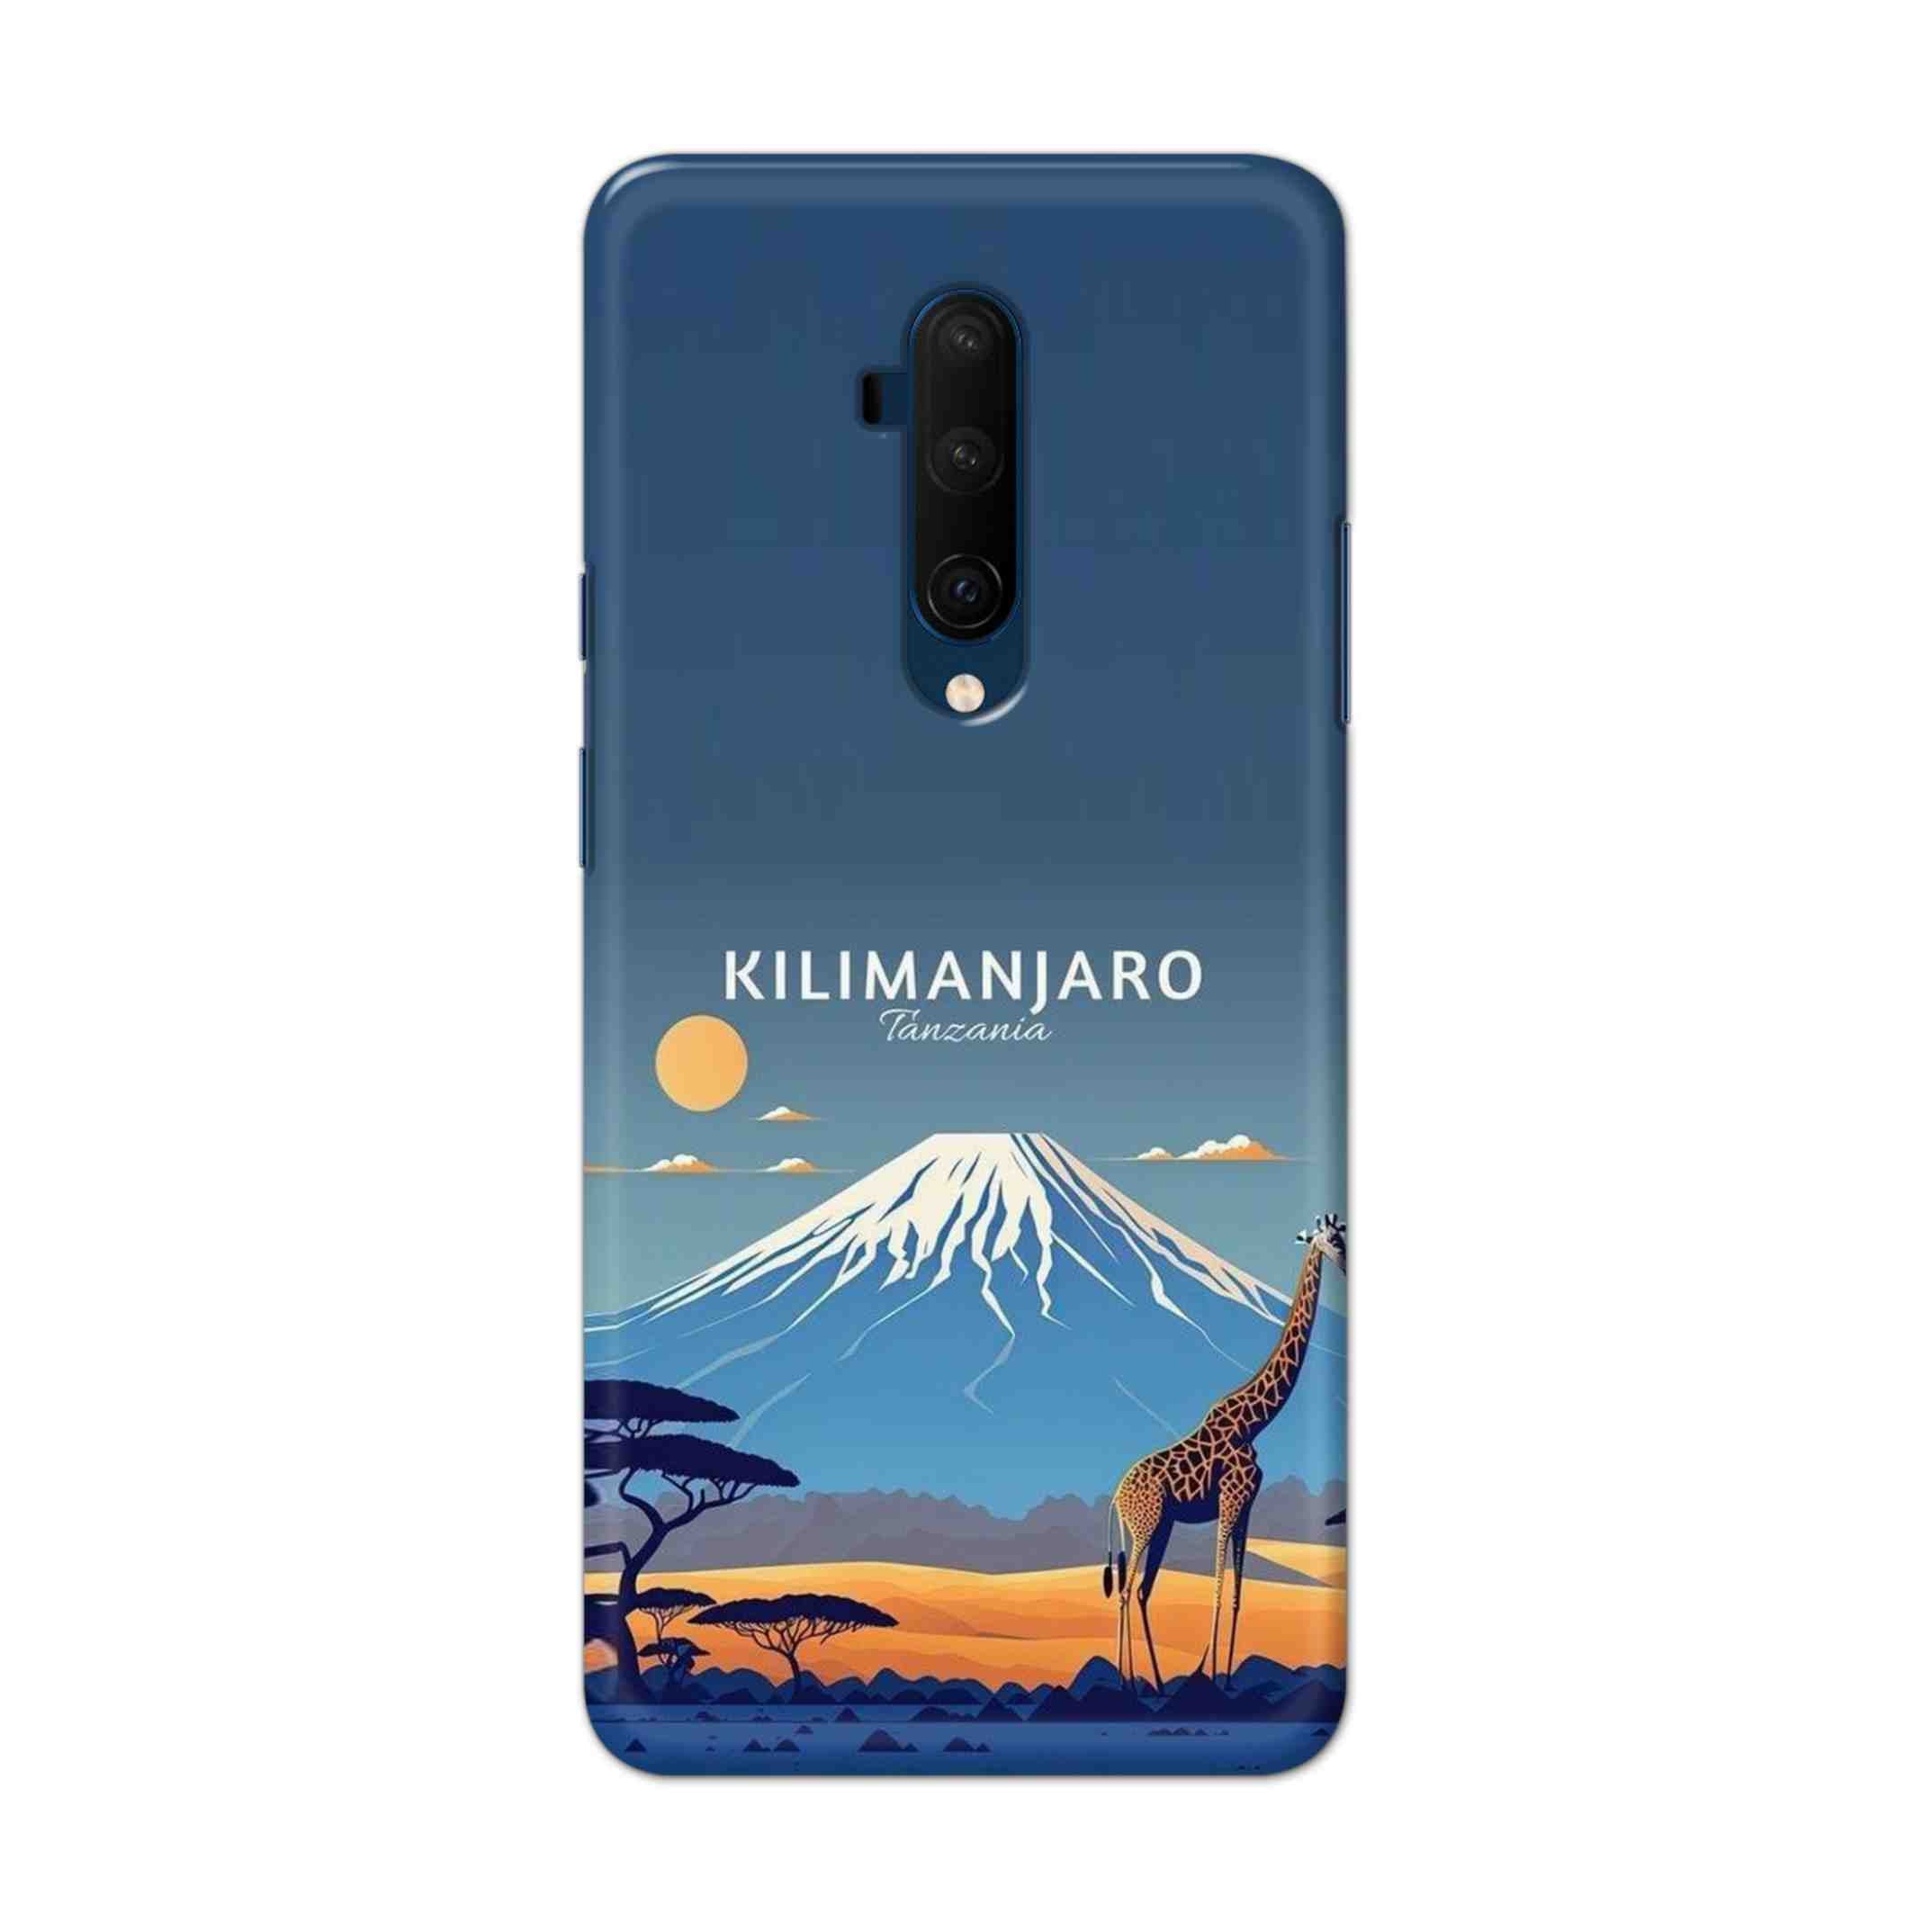 Buy Kilimanjaro Hard Back Mobile Phone Case Cover For OnePlus 7T Pro Online